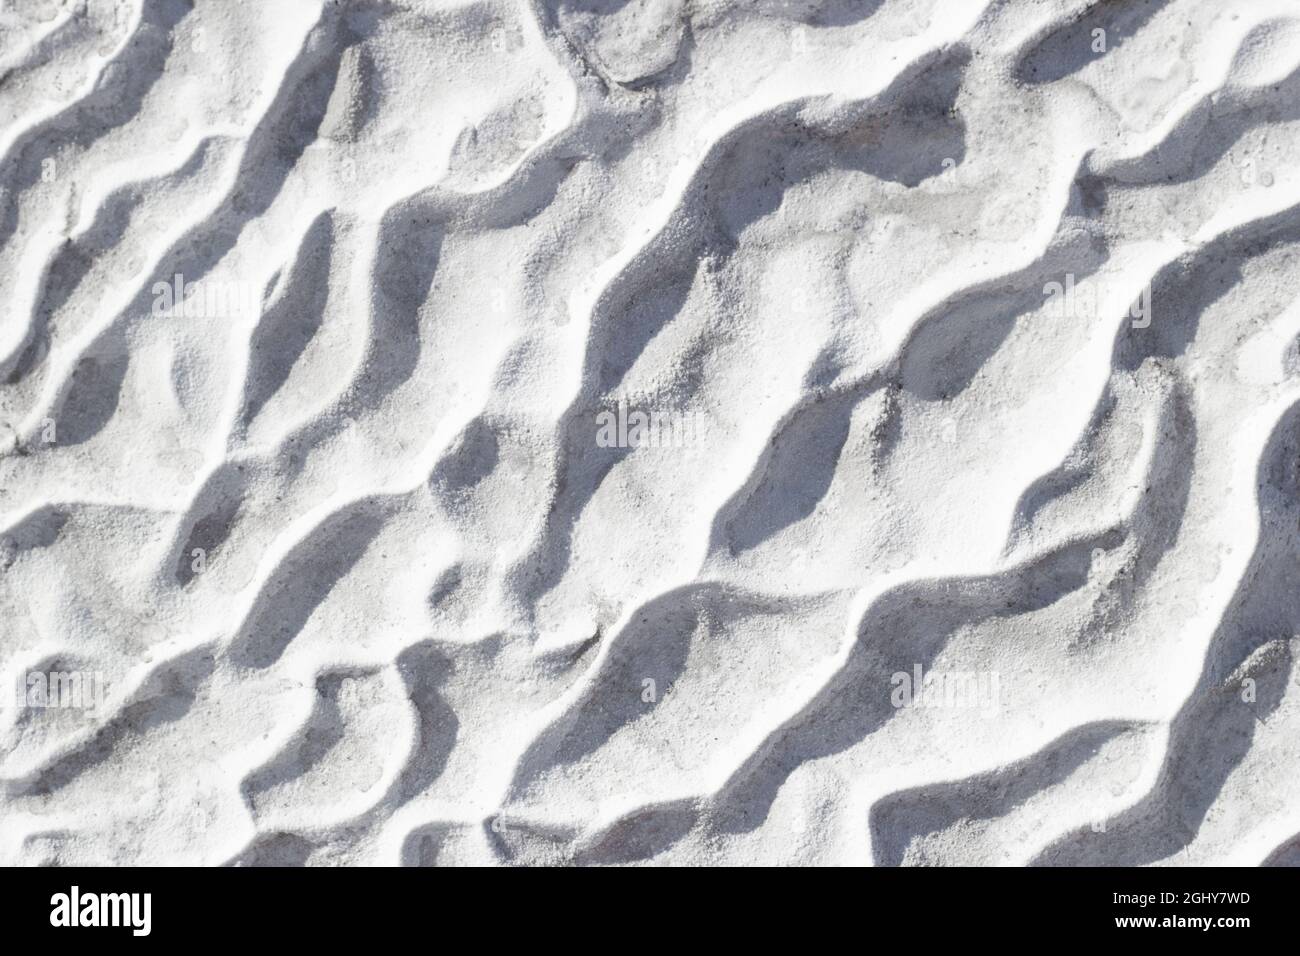 Gray texture background of Pamukkale calcium travertine in Turkey, pattern of diagonal waves, close-up. Stock Photo